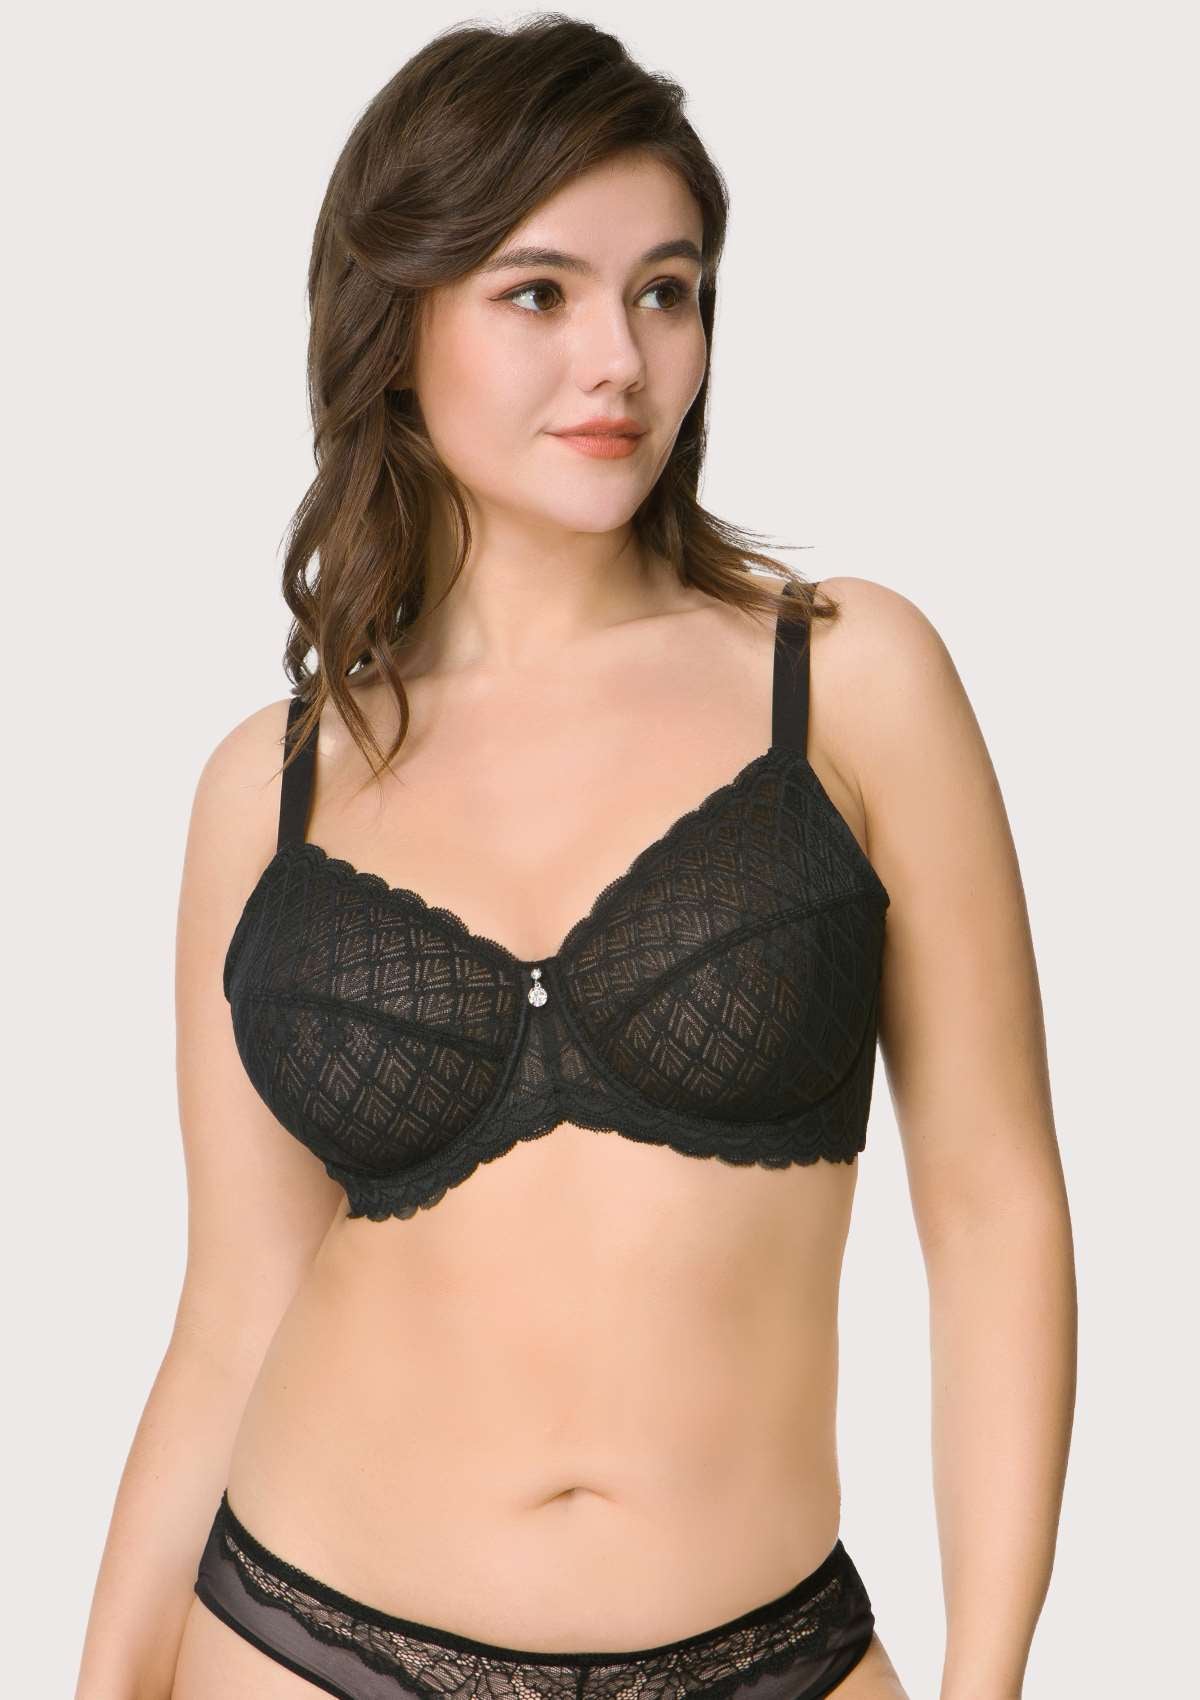 HSIA Plaid Full-Coverage Bra: Soft Bra With Thick Straps - Yellow / 34 / D